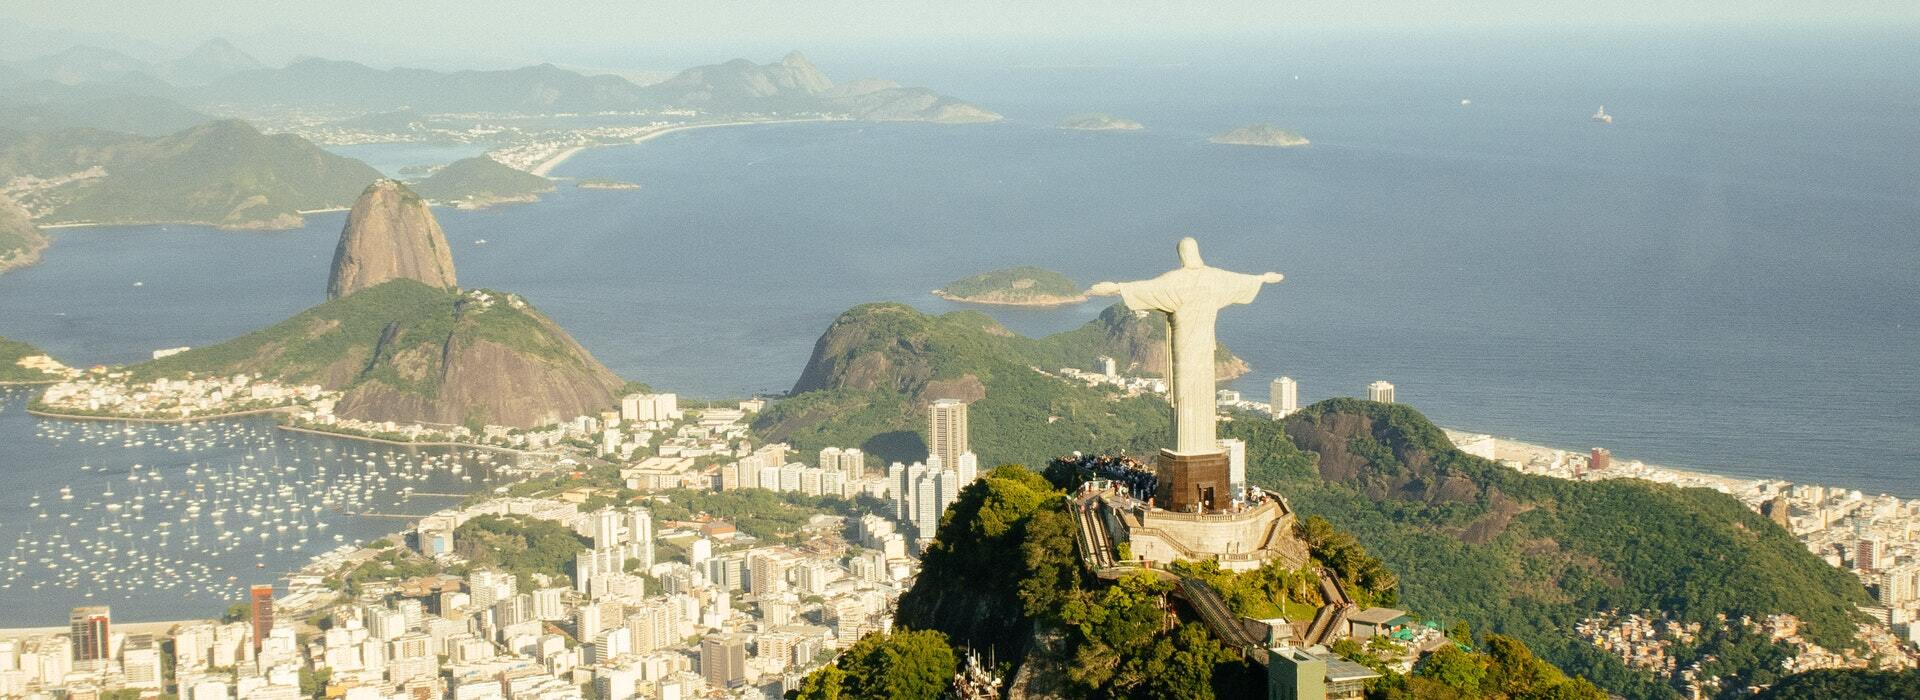 Brazil Tour Packages & Vacation Packages